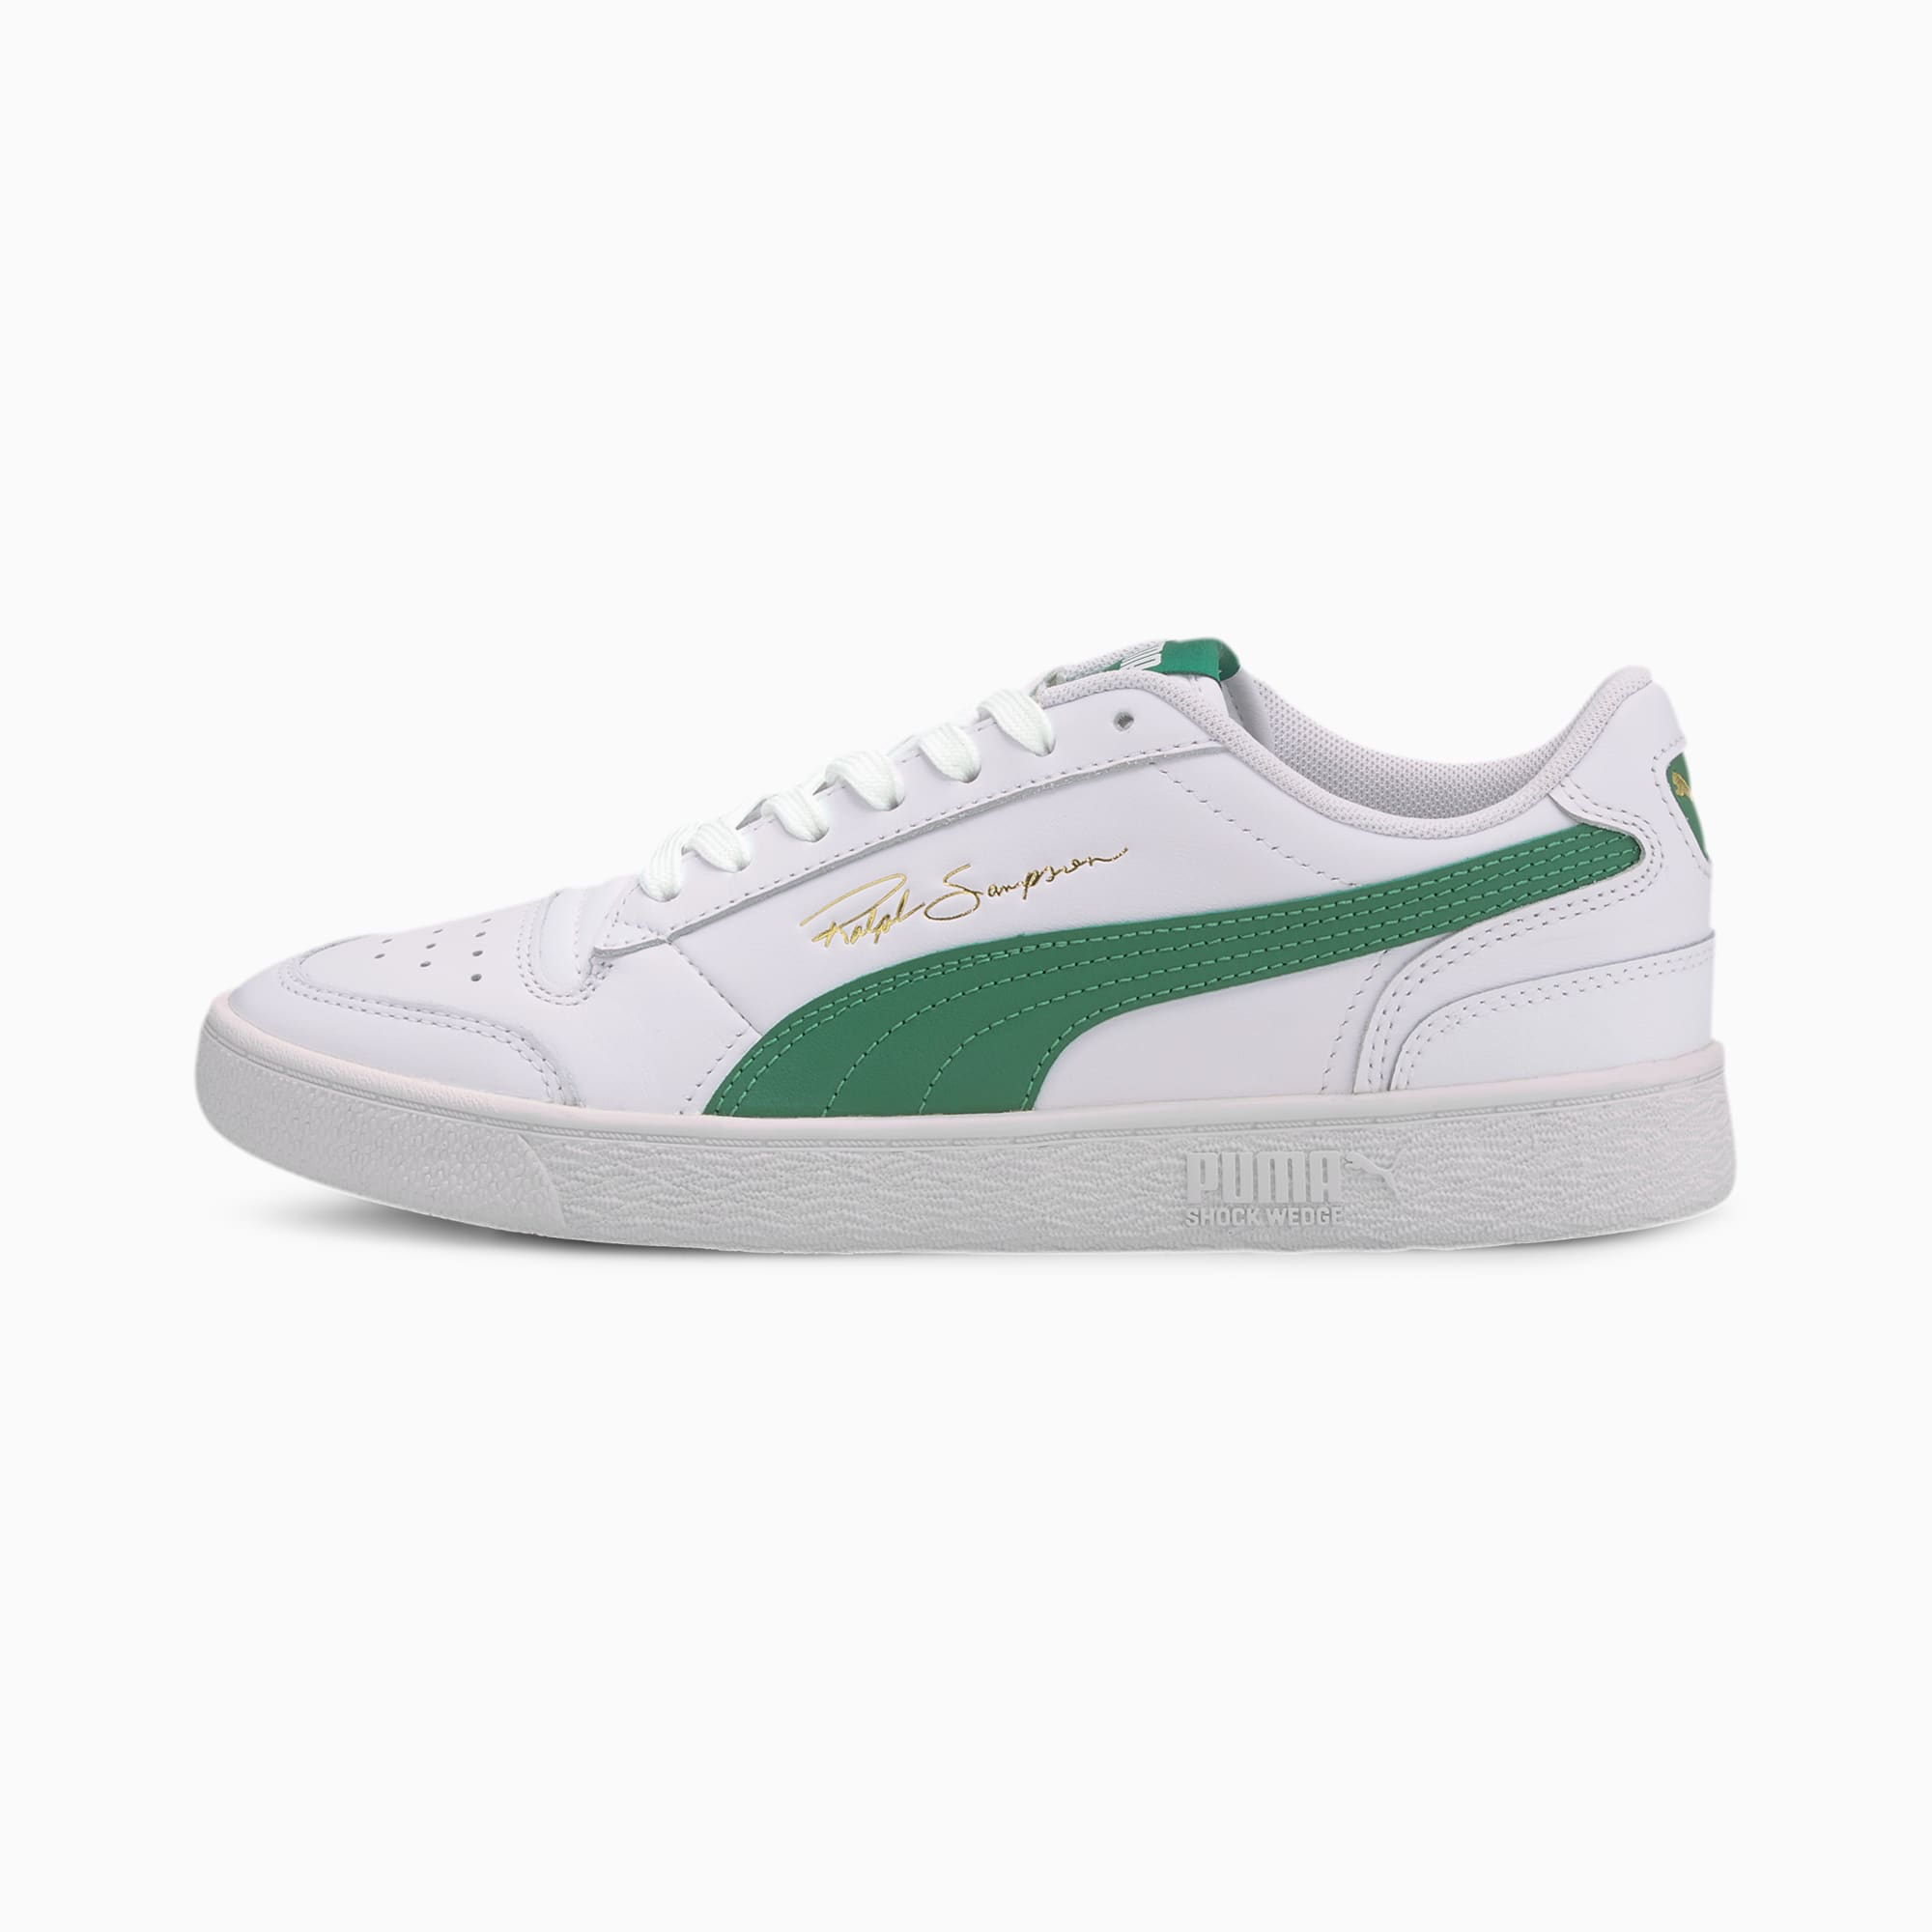 PUMA Chaussure Ralph Sampson Lo sneakers, Blanc/Vert, Taille 38.5, Chaussures